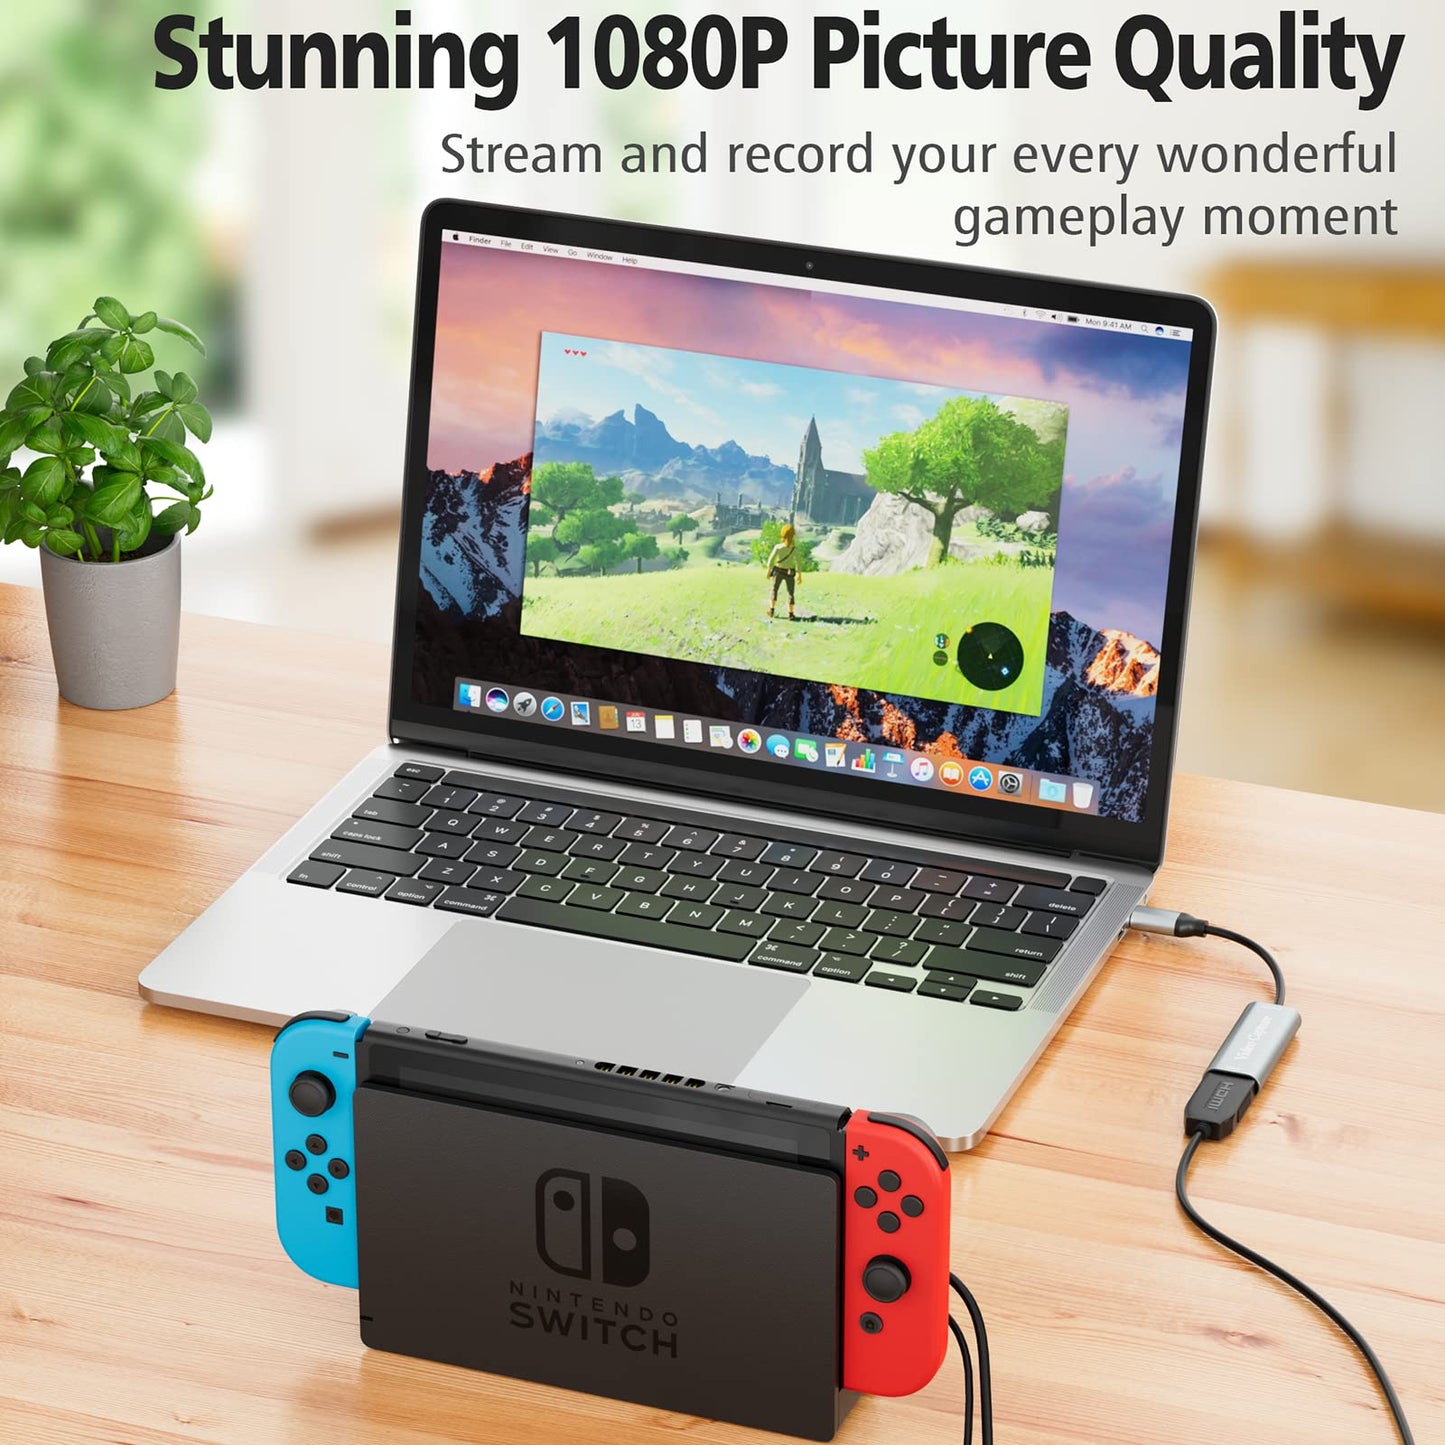 4K HDMI to USB Video Capture Card, Cam Link Capture Card, Type-C 1080P HD Video Recorder, Game Video Capture for Live Streaming, Gaming, on Switch, PS4, PS5, Xbox, OBS, Work with PC/Windows/Mac OS